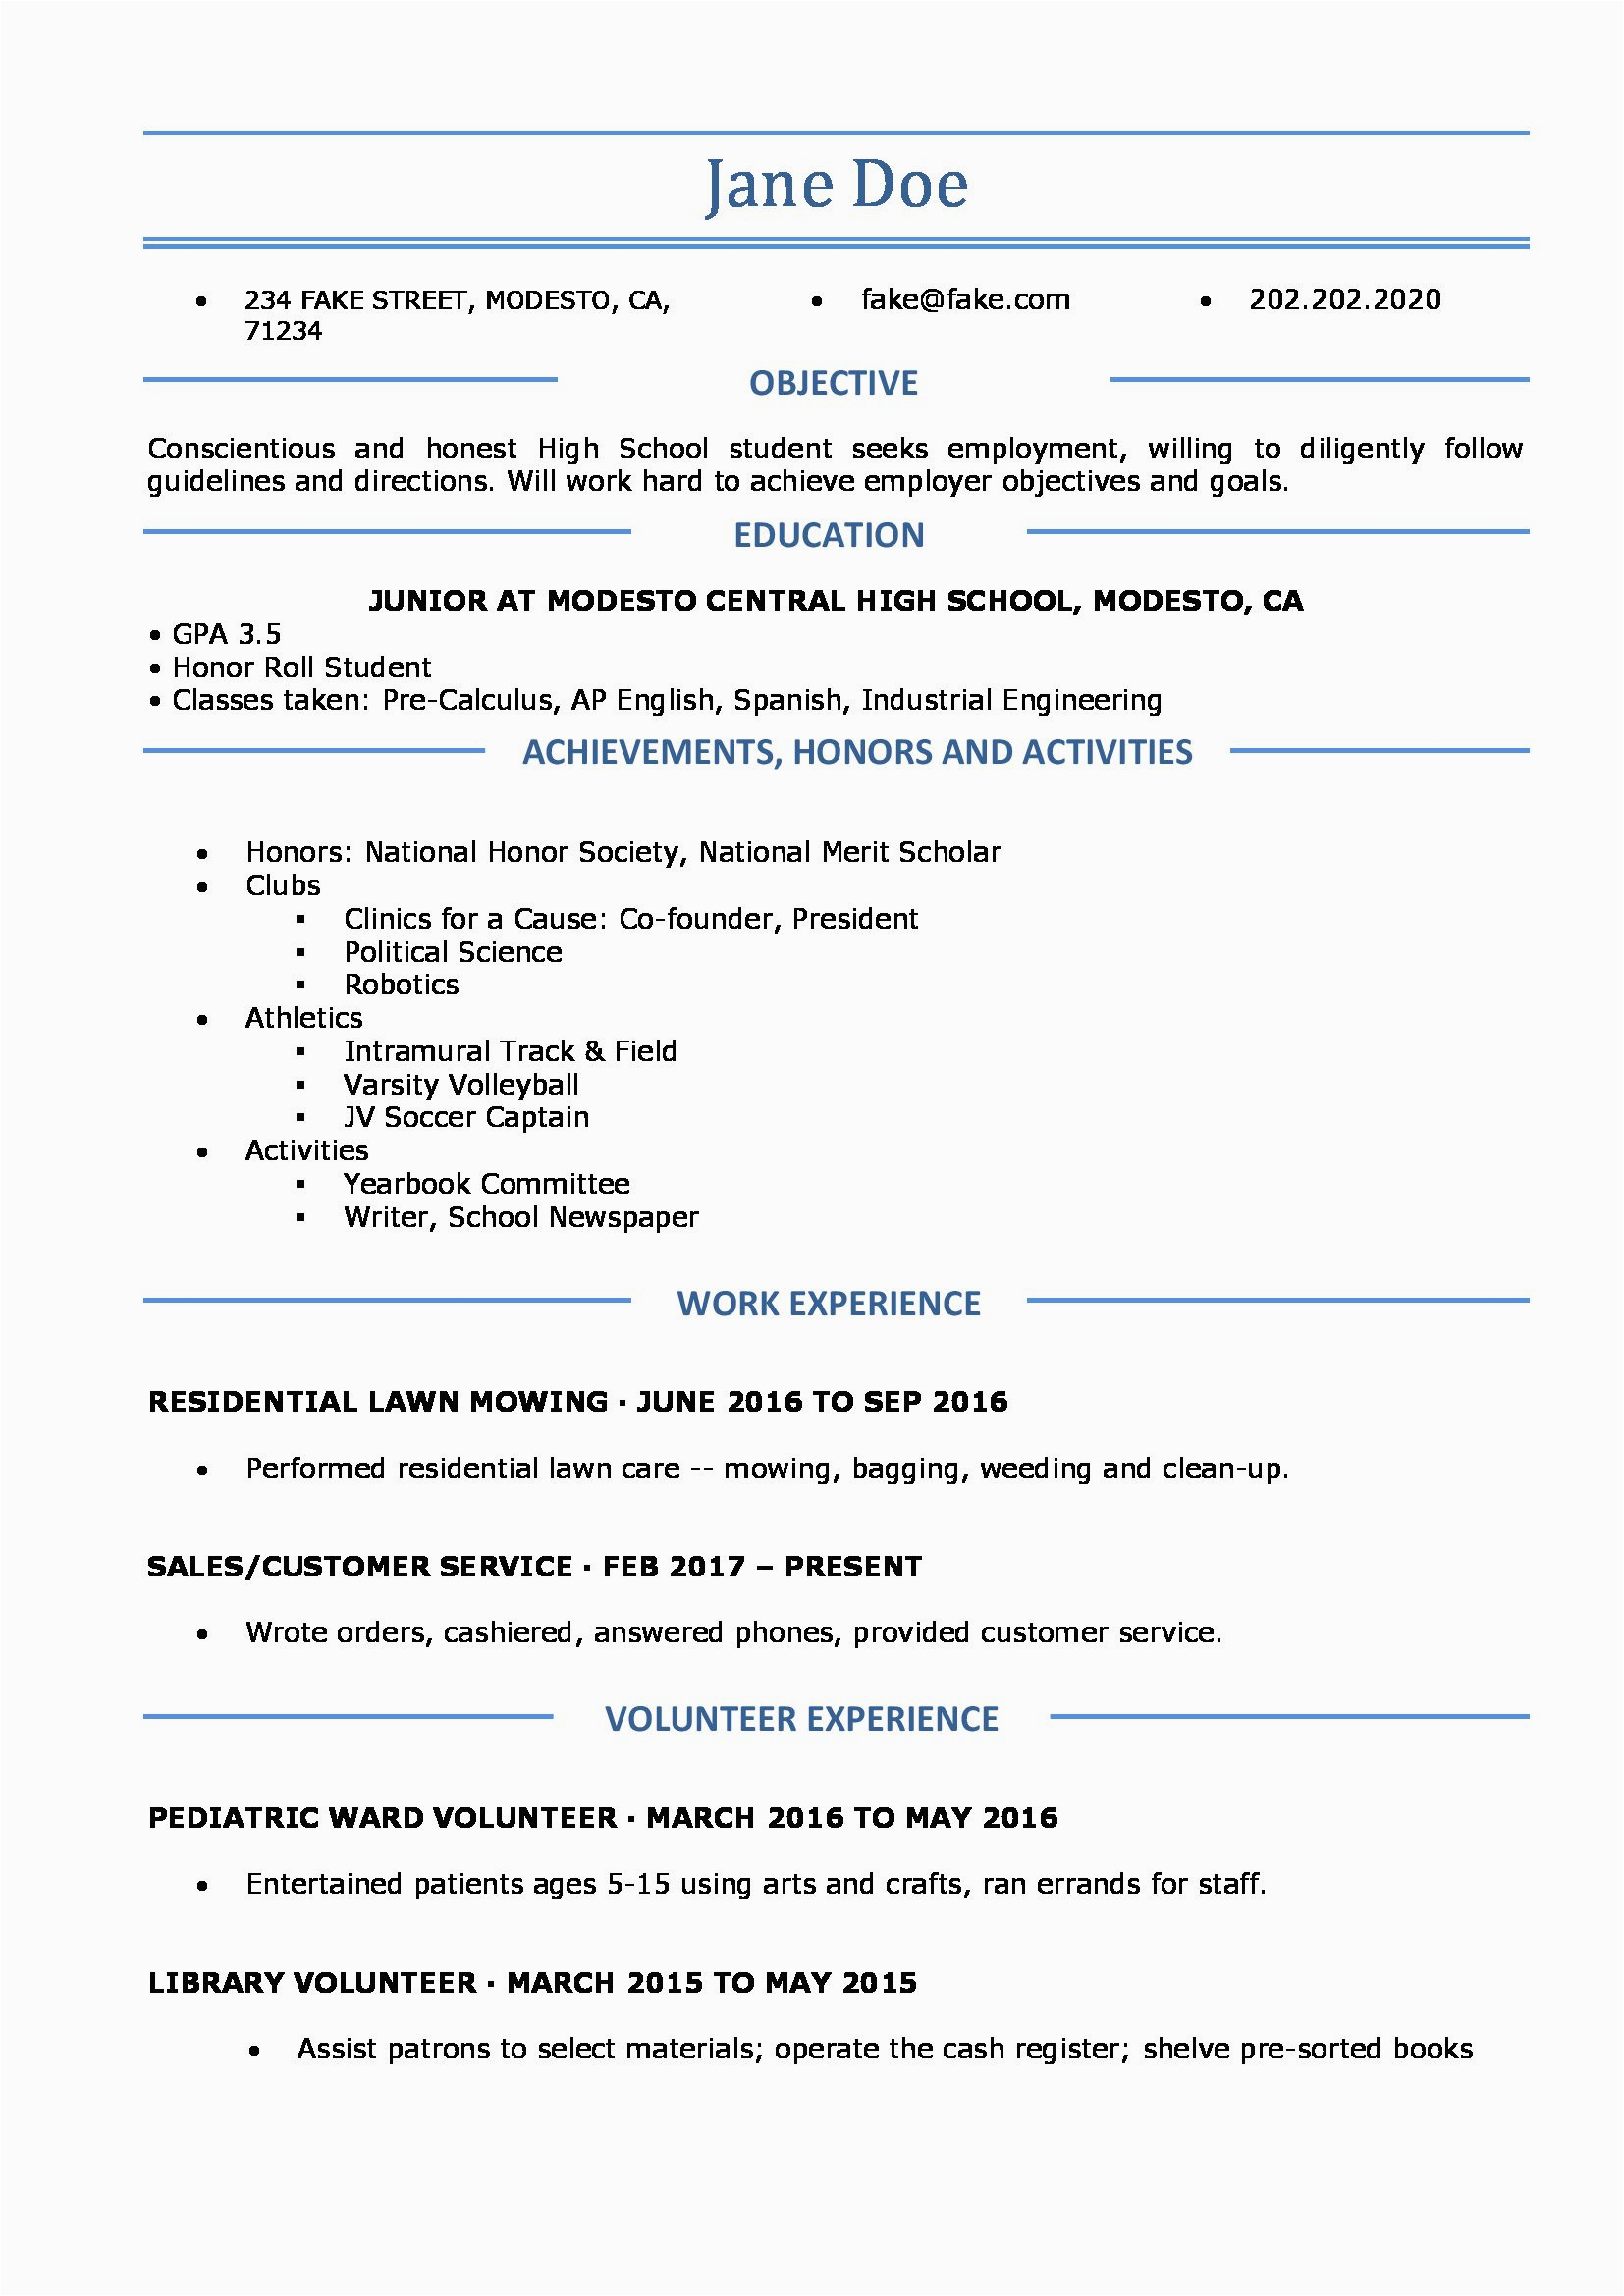 Resume Templates for High School Students Free Resumes for High School Students Luxury High School Resume